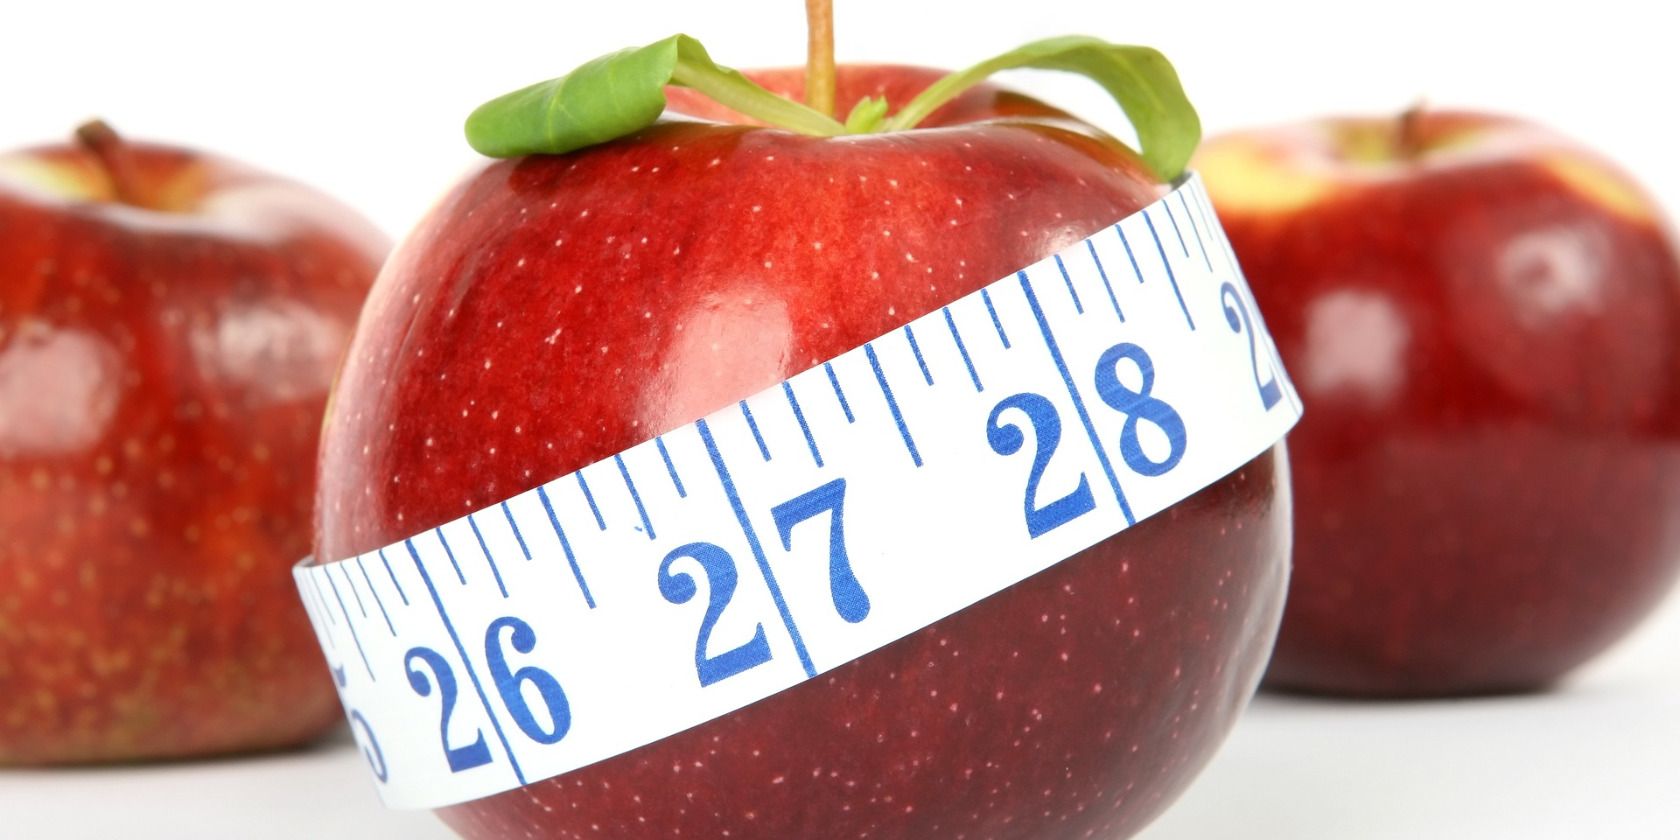 Apples and a tape measure